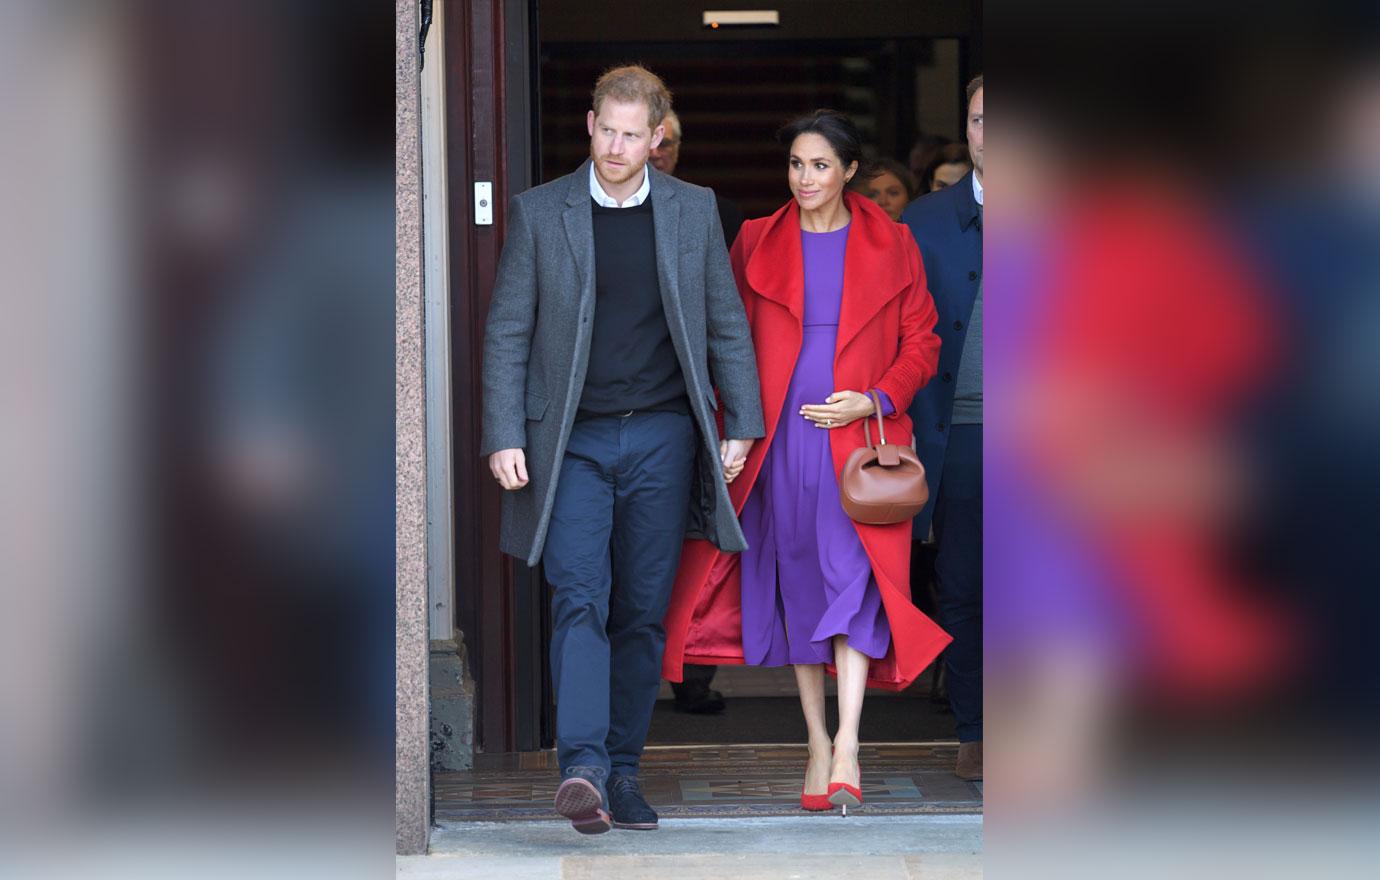 14 Ways To Colour Clash Purple And Red Just Like Meghan Markle